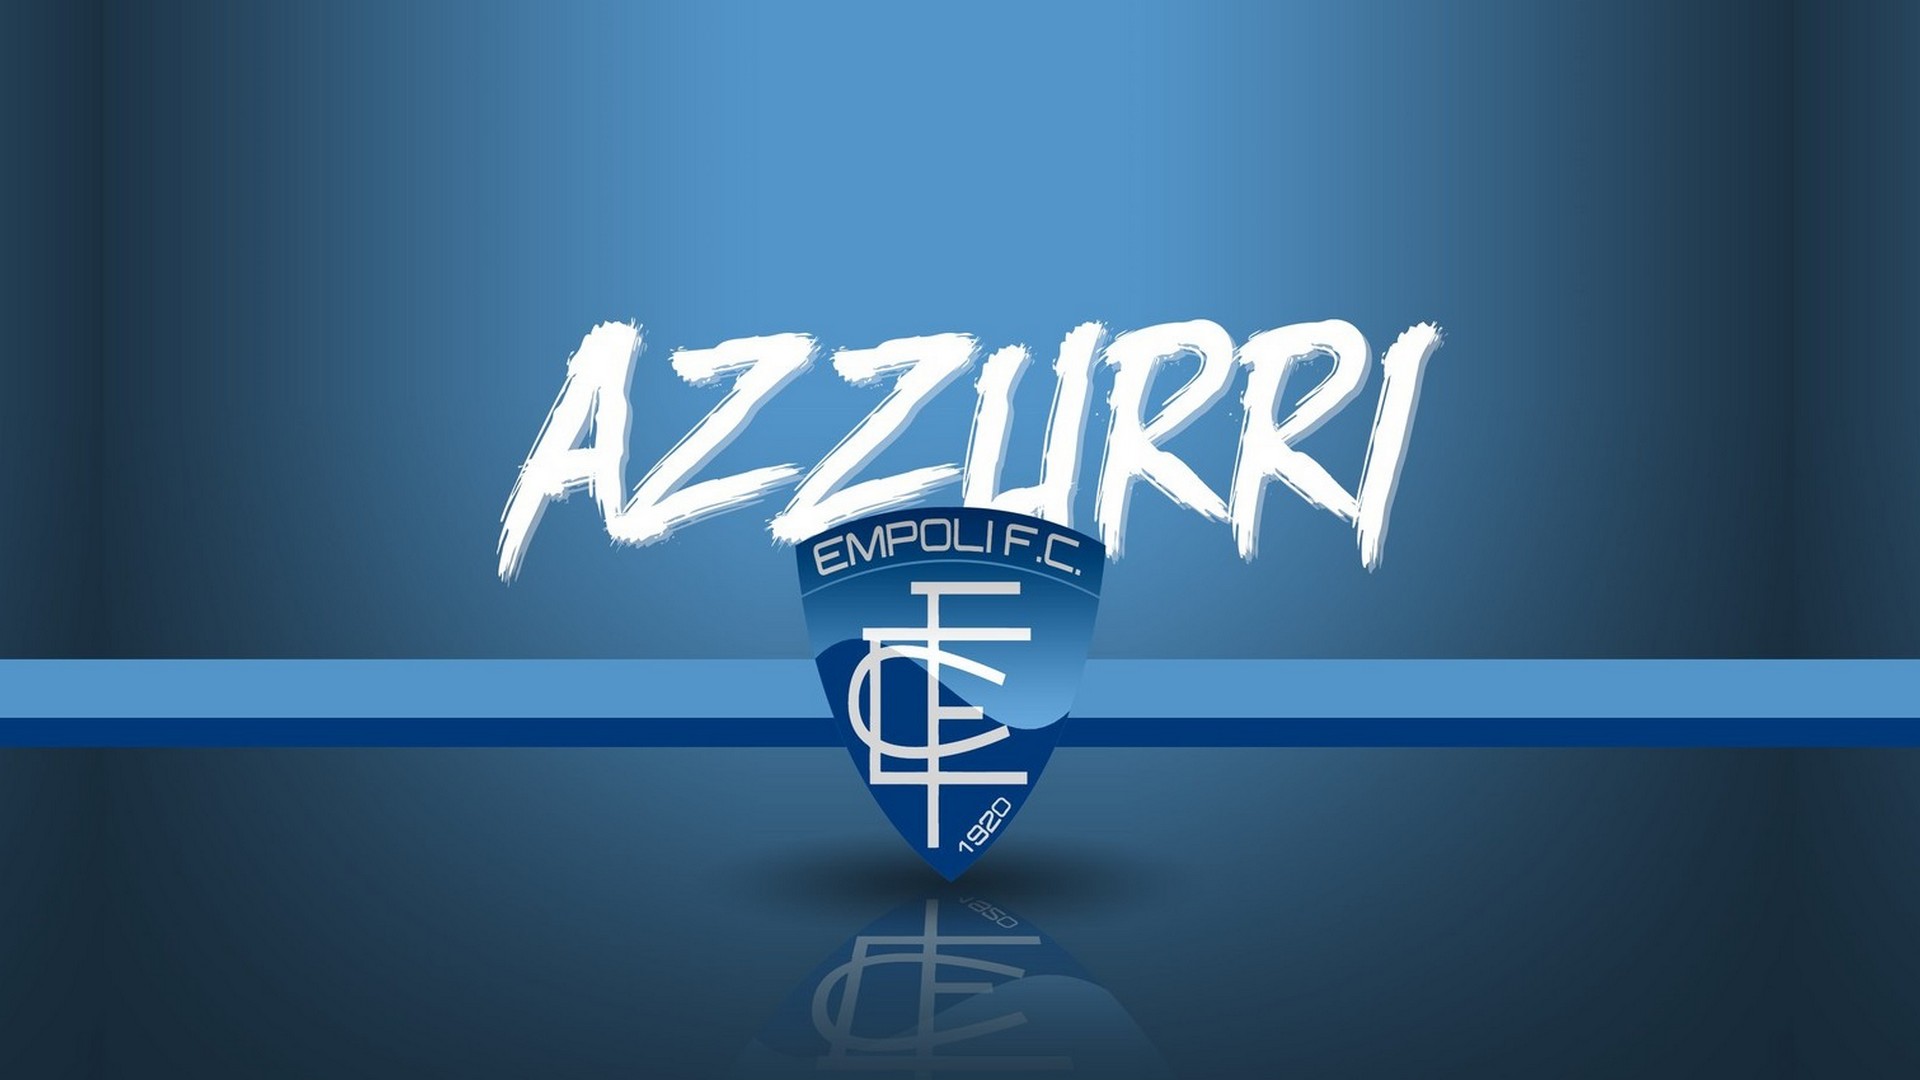 Empoli FC Wallpaper HD with high-resolution 1920x1080 pixel. You can use this wallpaper for your Desktop Computers, Mac Screensavers, Windows Backgrounds, iPhone Wallpapers, Tablet or Android Lock screen and another Mobile device